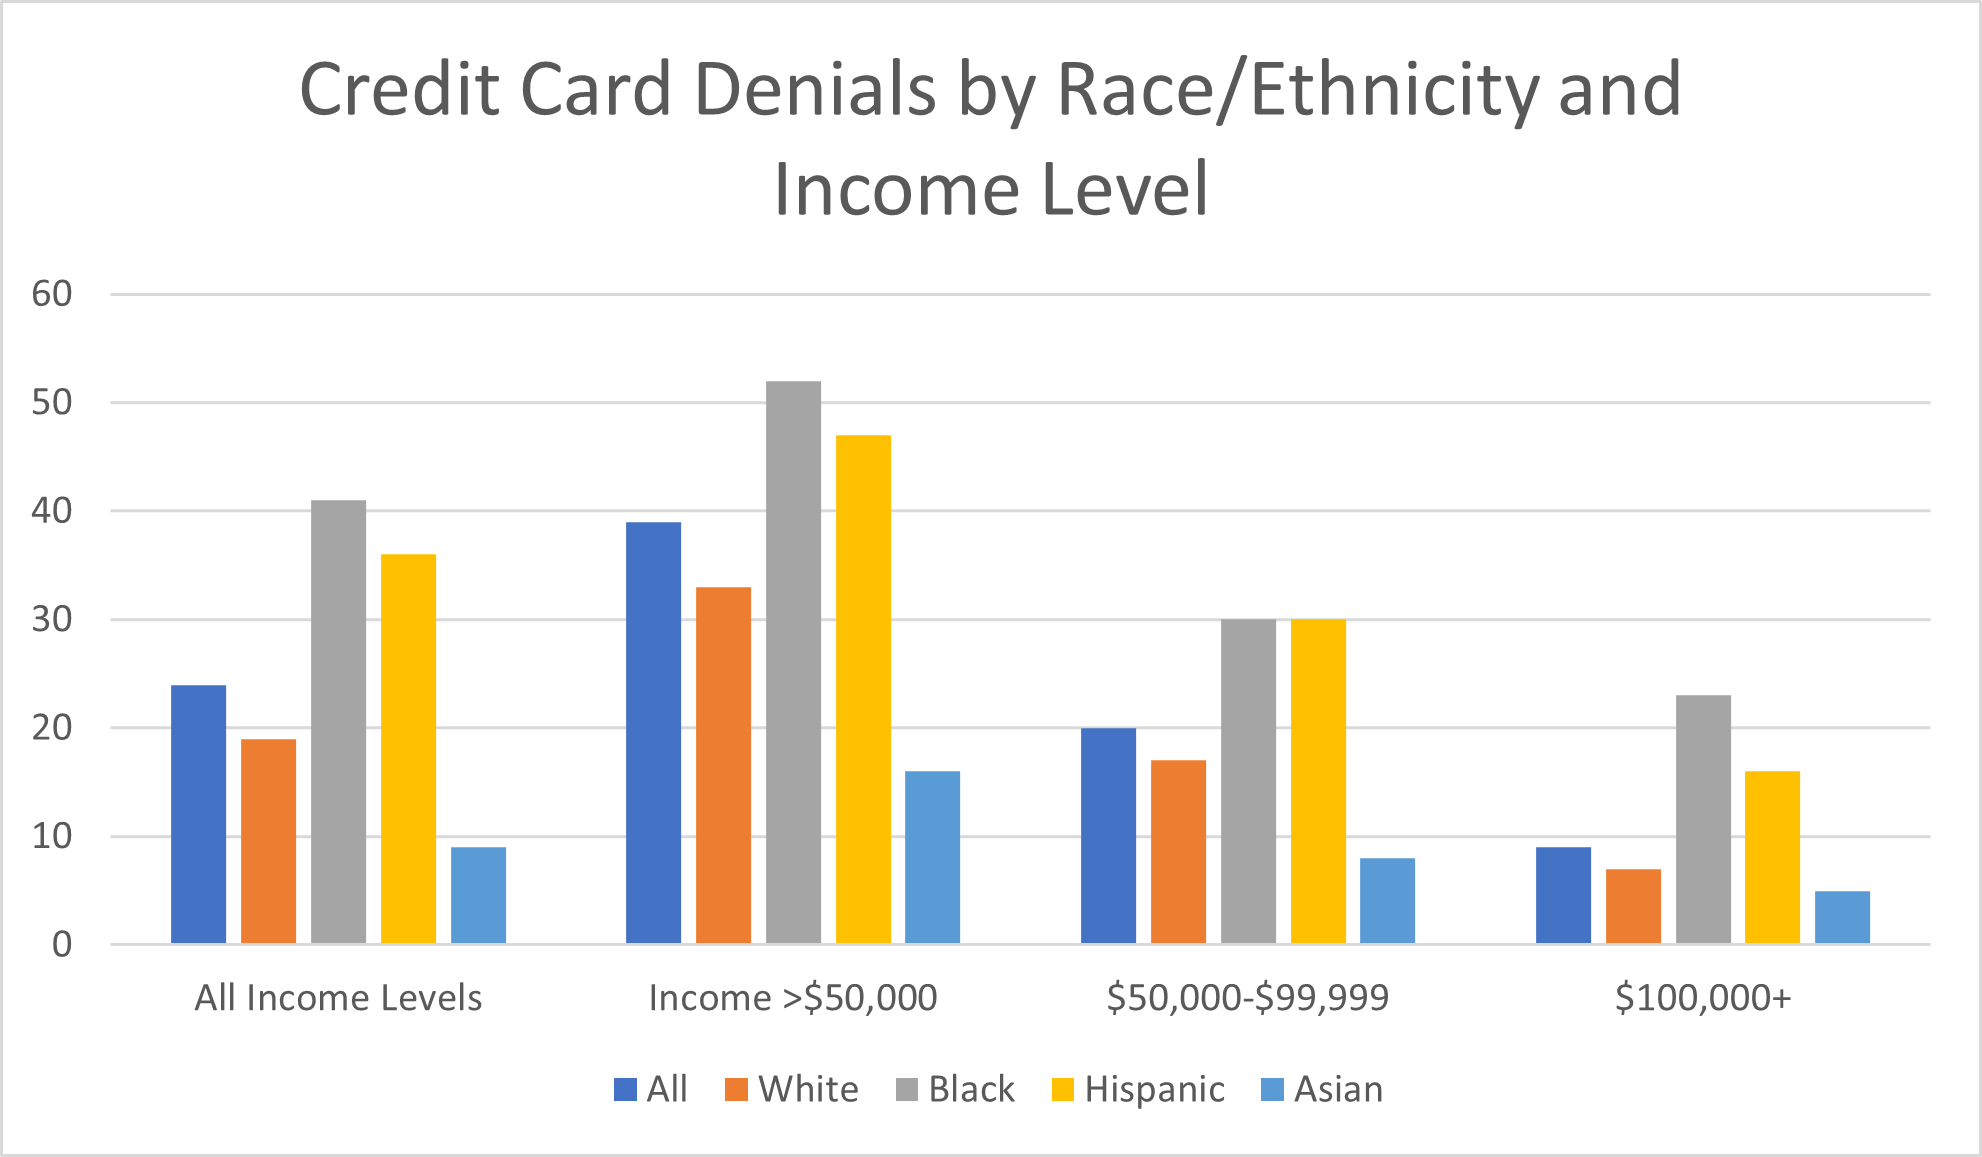 Credit Card Denials by Race/Ethnicity and Income Level